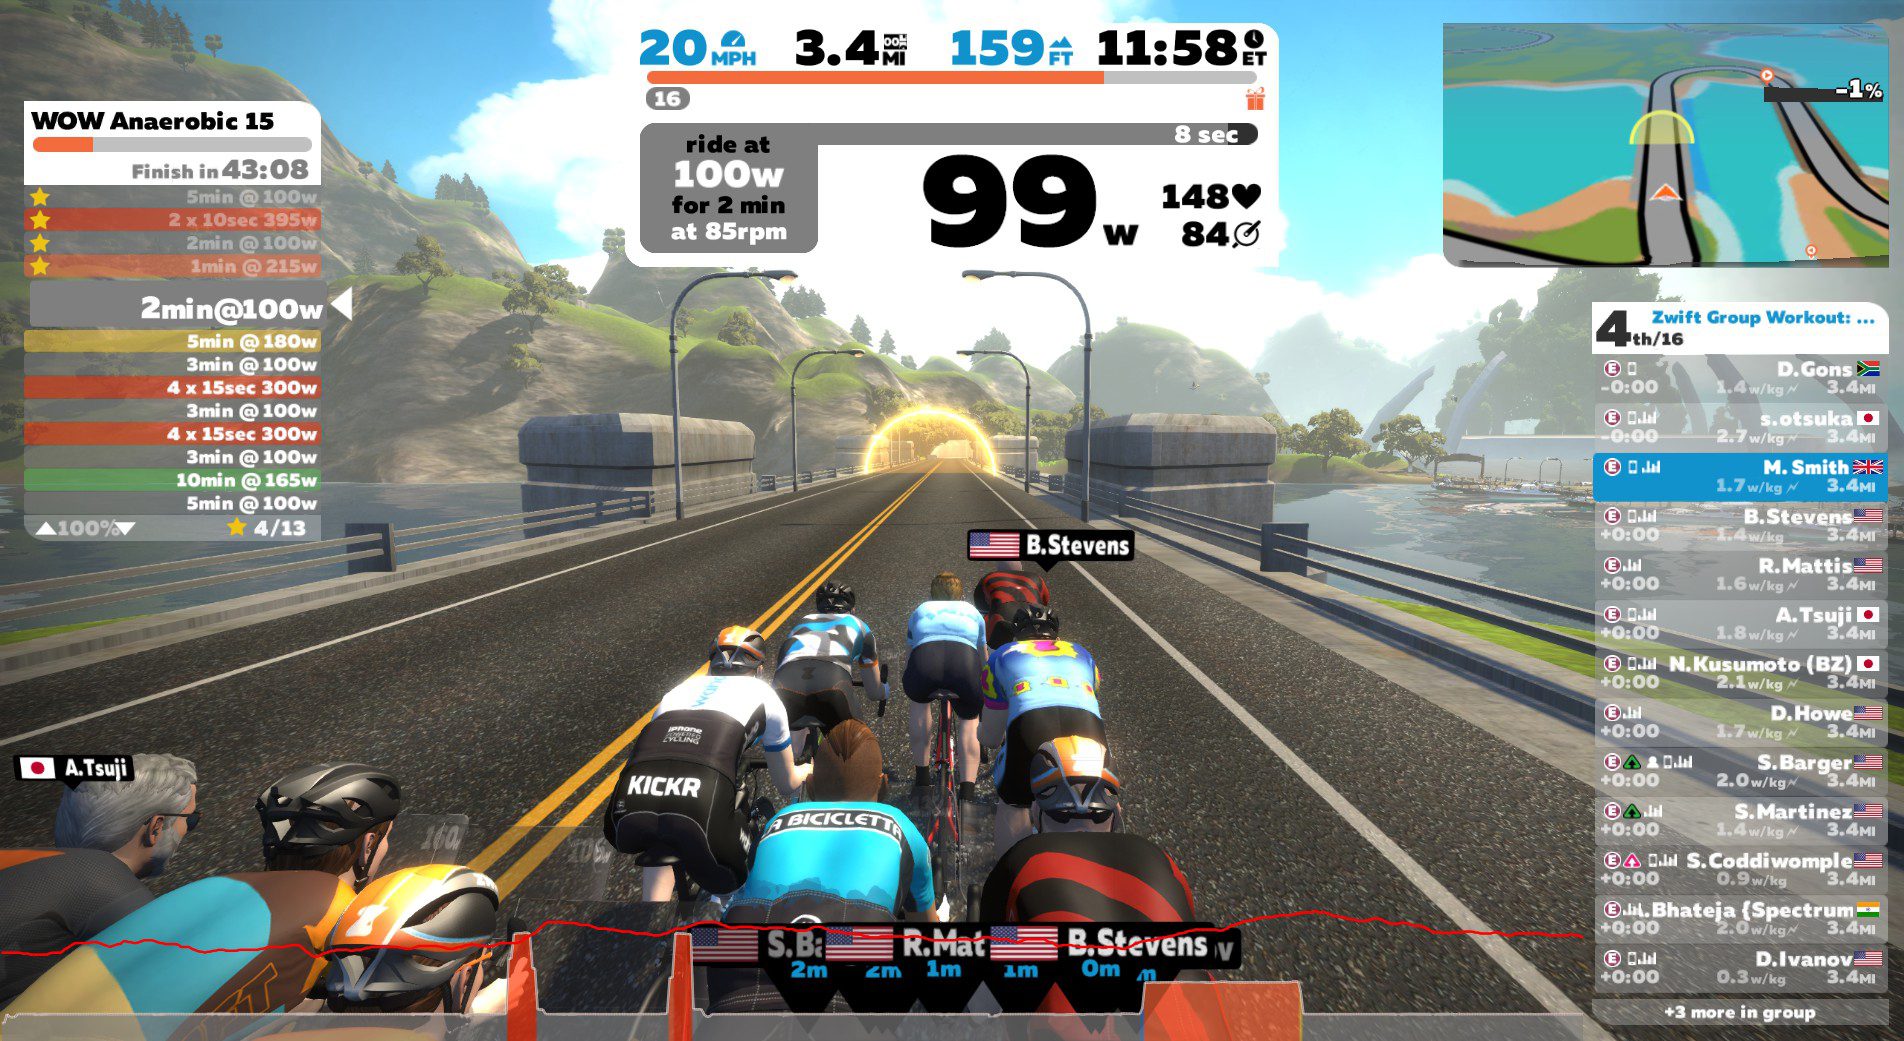 cost of zwift per month